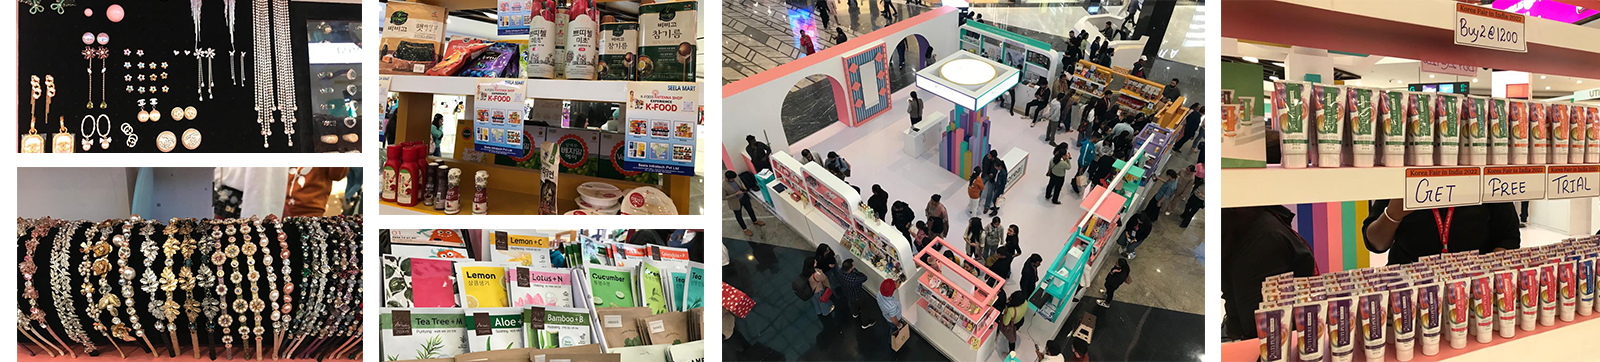 Korea Fair at Elante Mall: Where Young Children Stuck to Buying Because of BTS